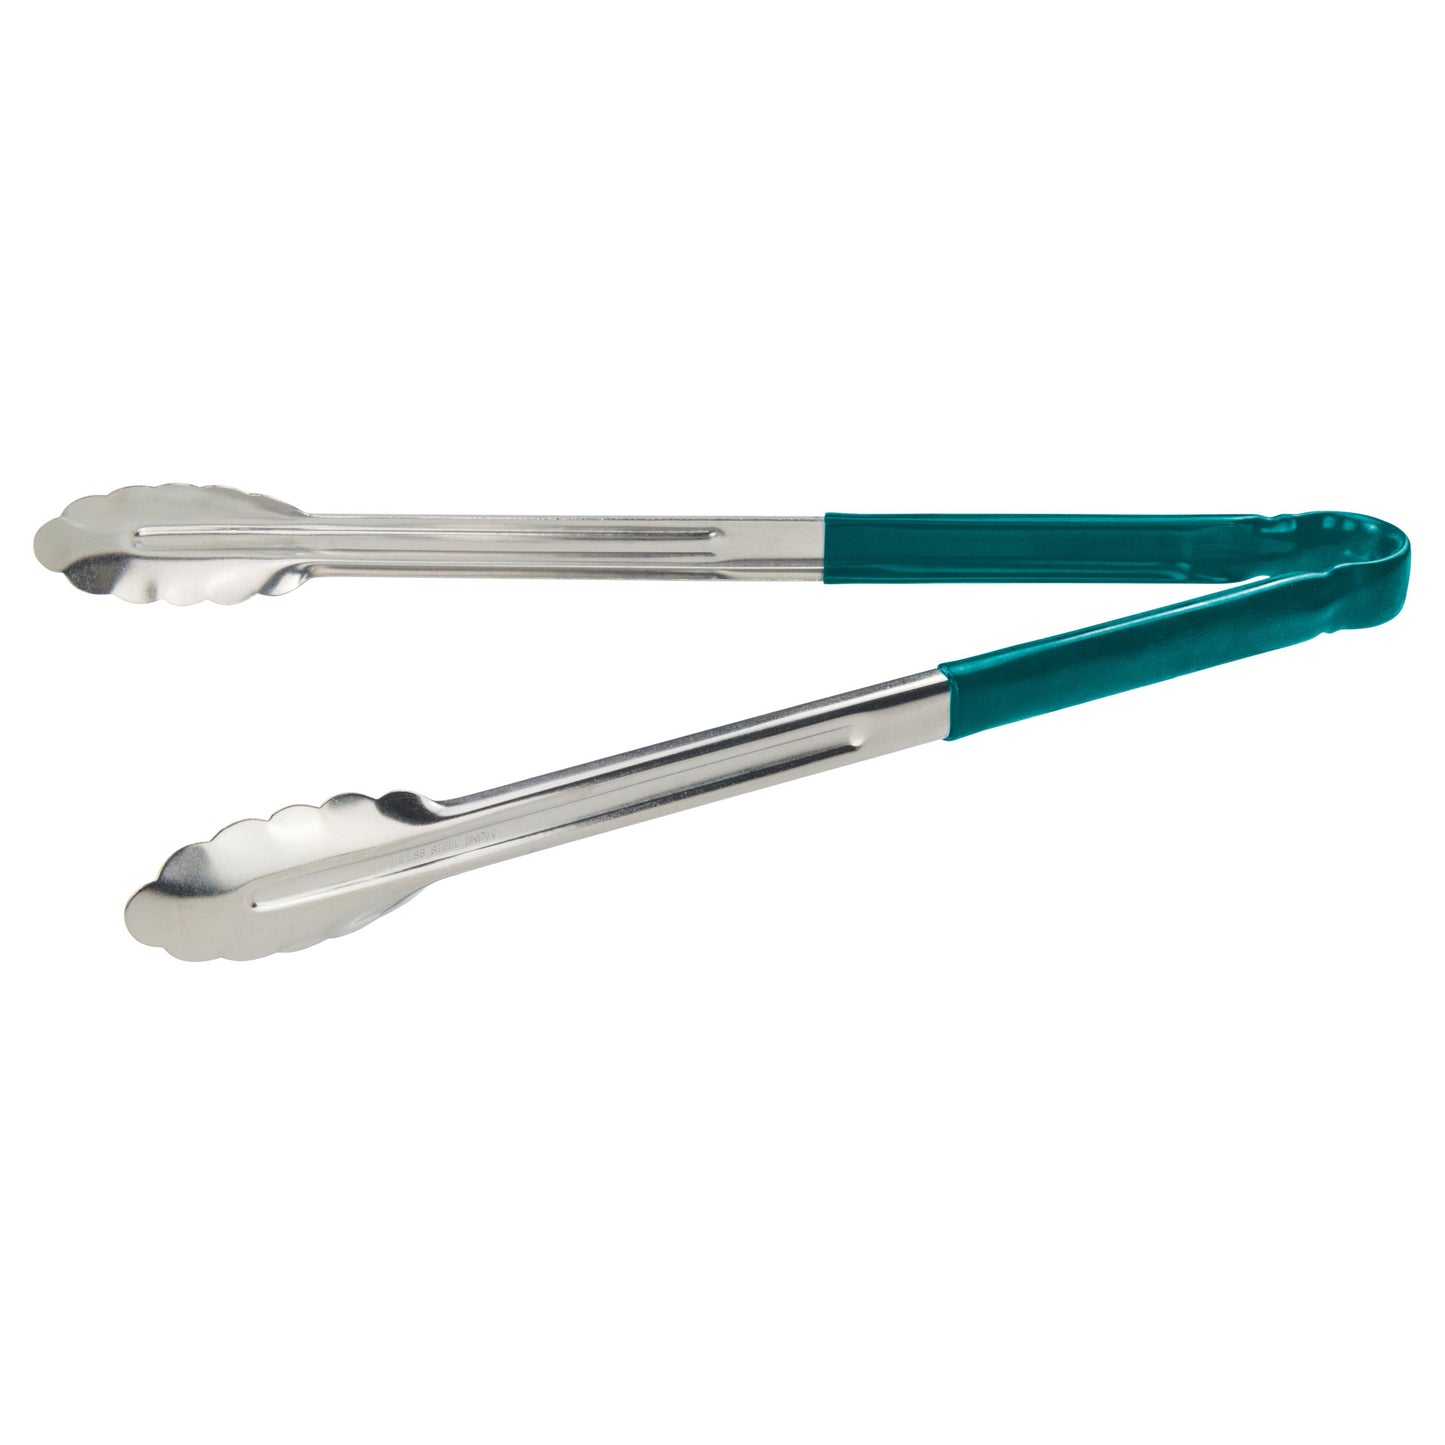 UT-16HP-G - Heavy-Duty Utility Tongs with Plastic Handle - 16", Green